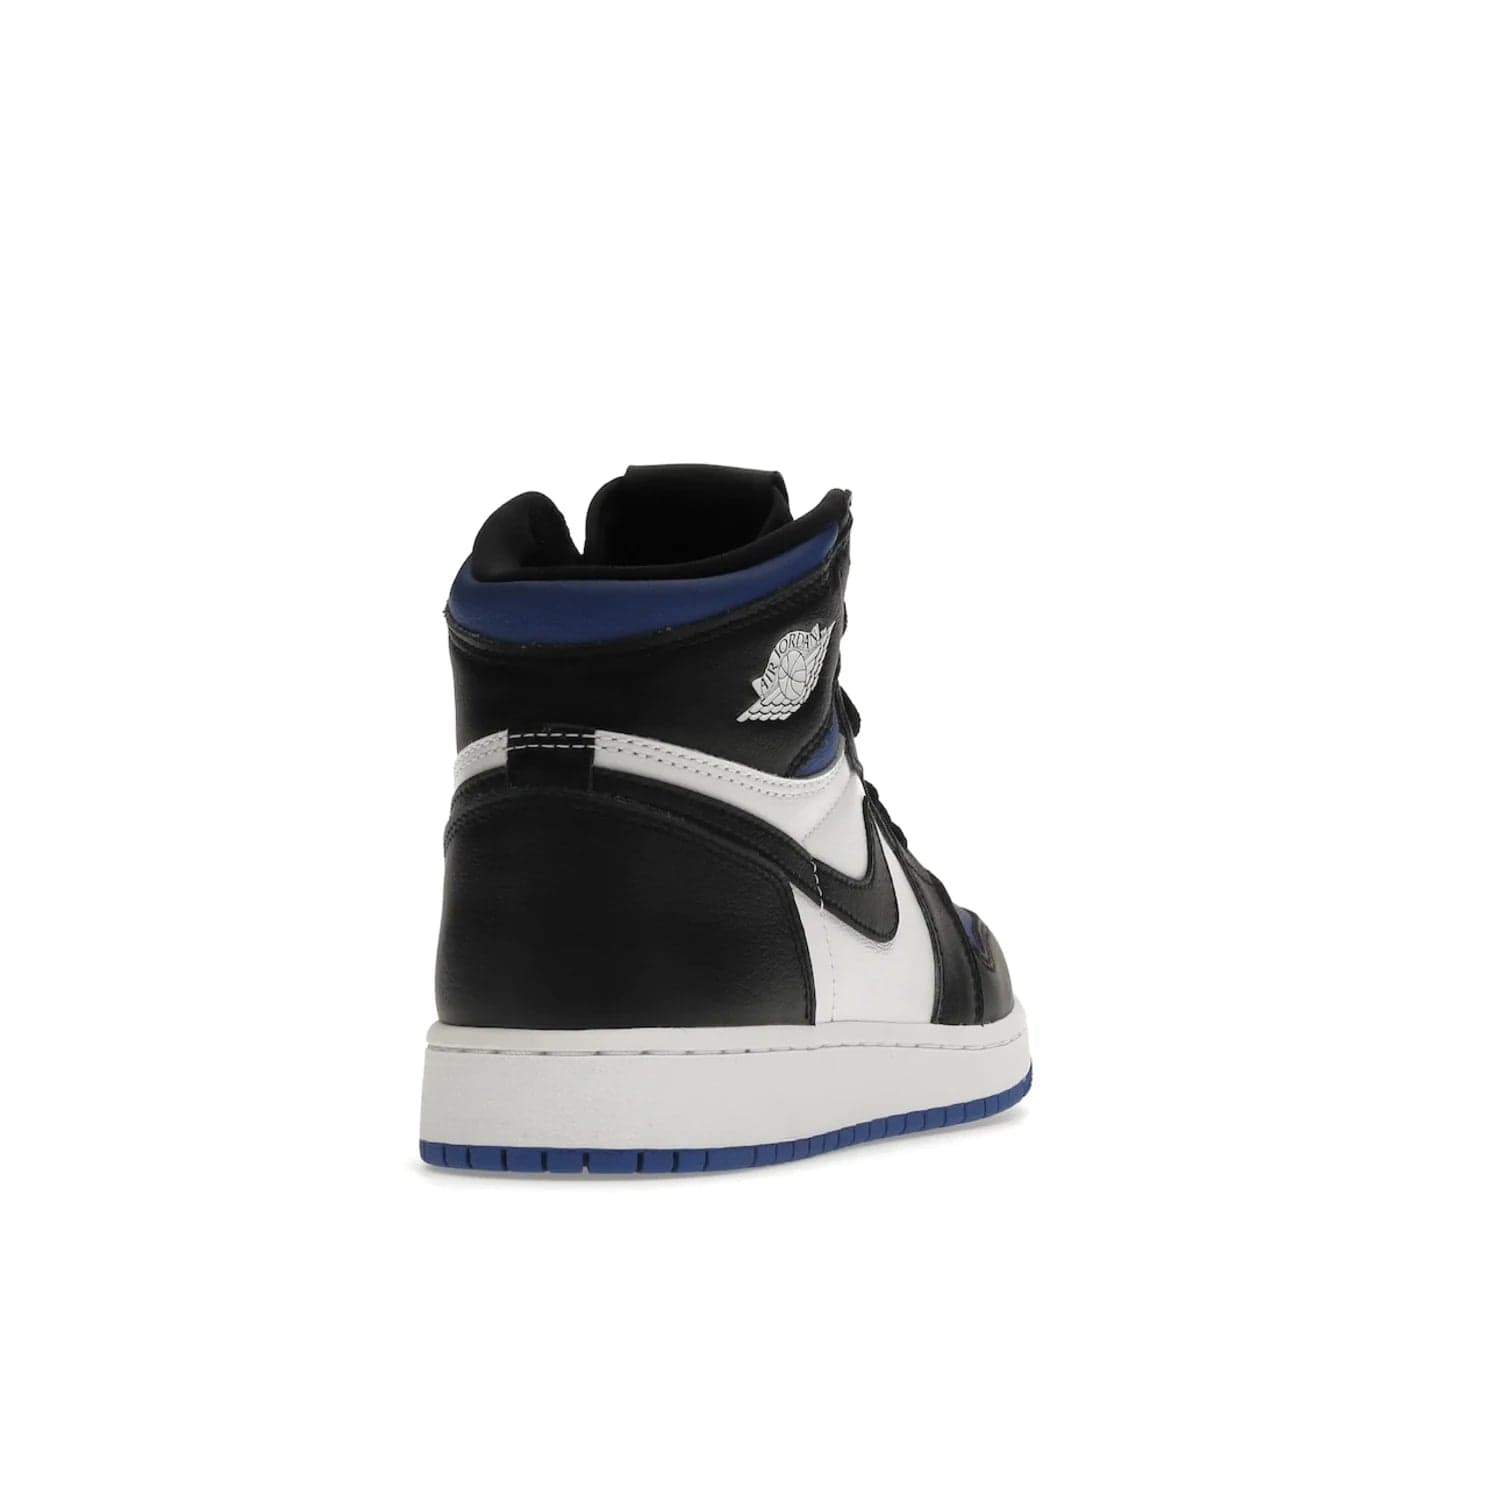 Jordan 1 Retro High Royal Toe (GS) - Image 30 - Only at www.BallersClubKickz.com - Take your sneaker wardrobe to the next level with the Jordan 1 Retro High Royal Toe (GS). Combining classic design with a luxurious white and royal blue leather upper, a textured black Swoosh and a tapered outsole. Stand out with the Air Jordan Wings logo near the heel.